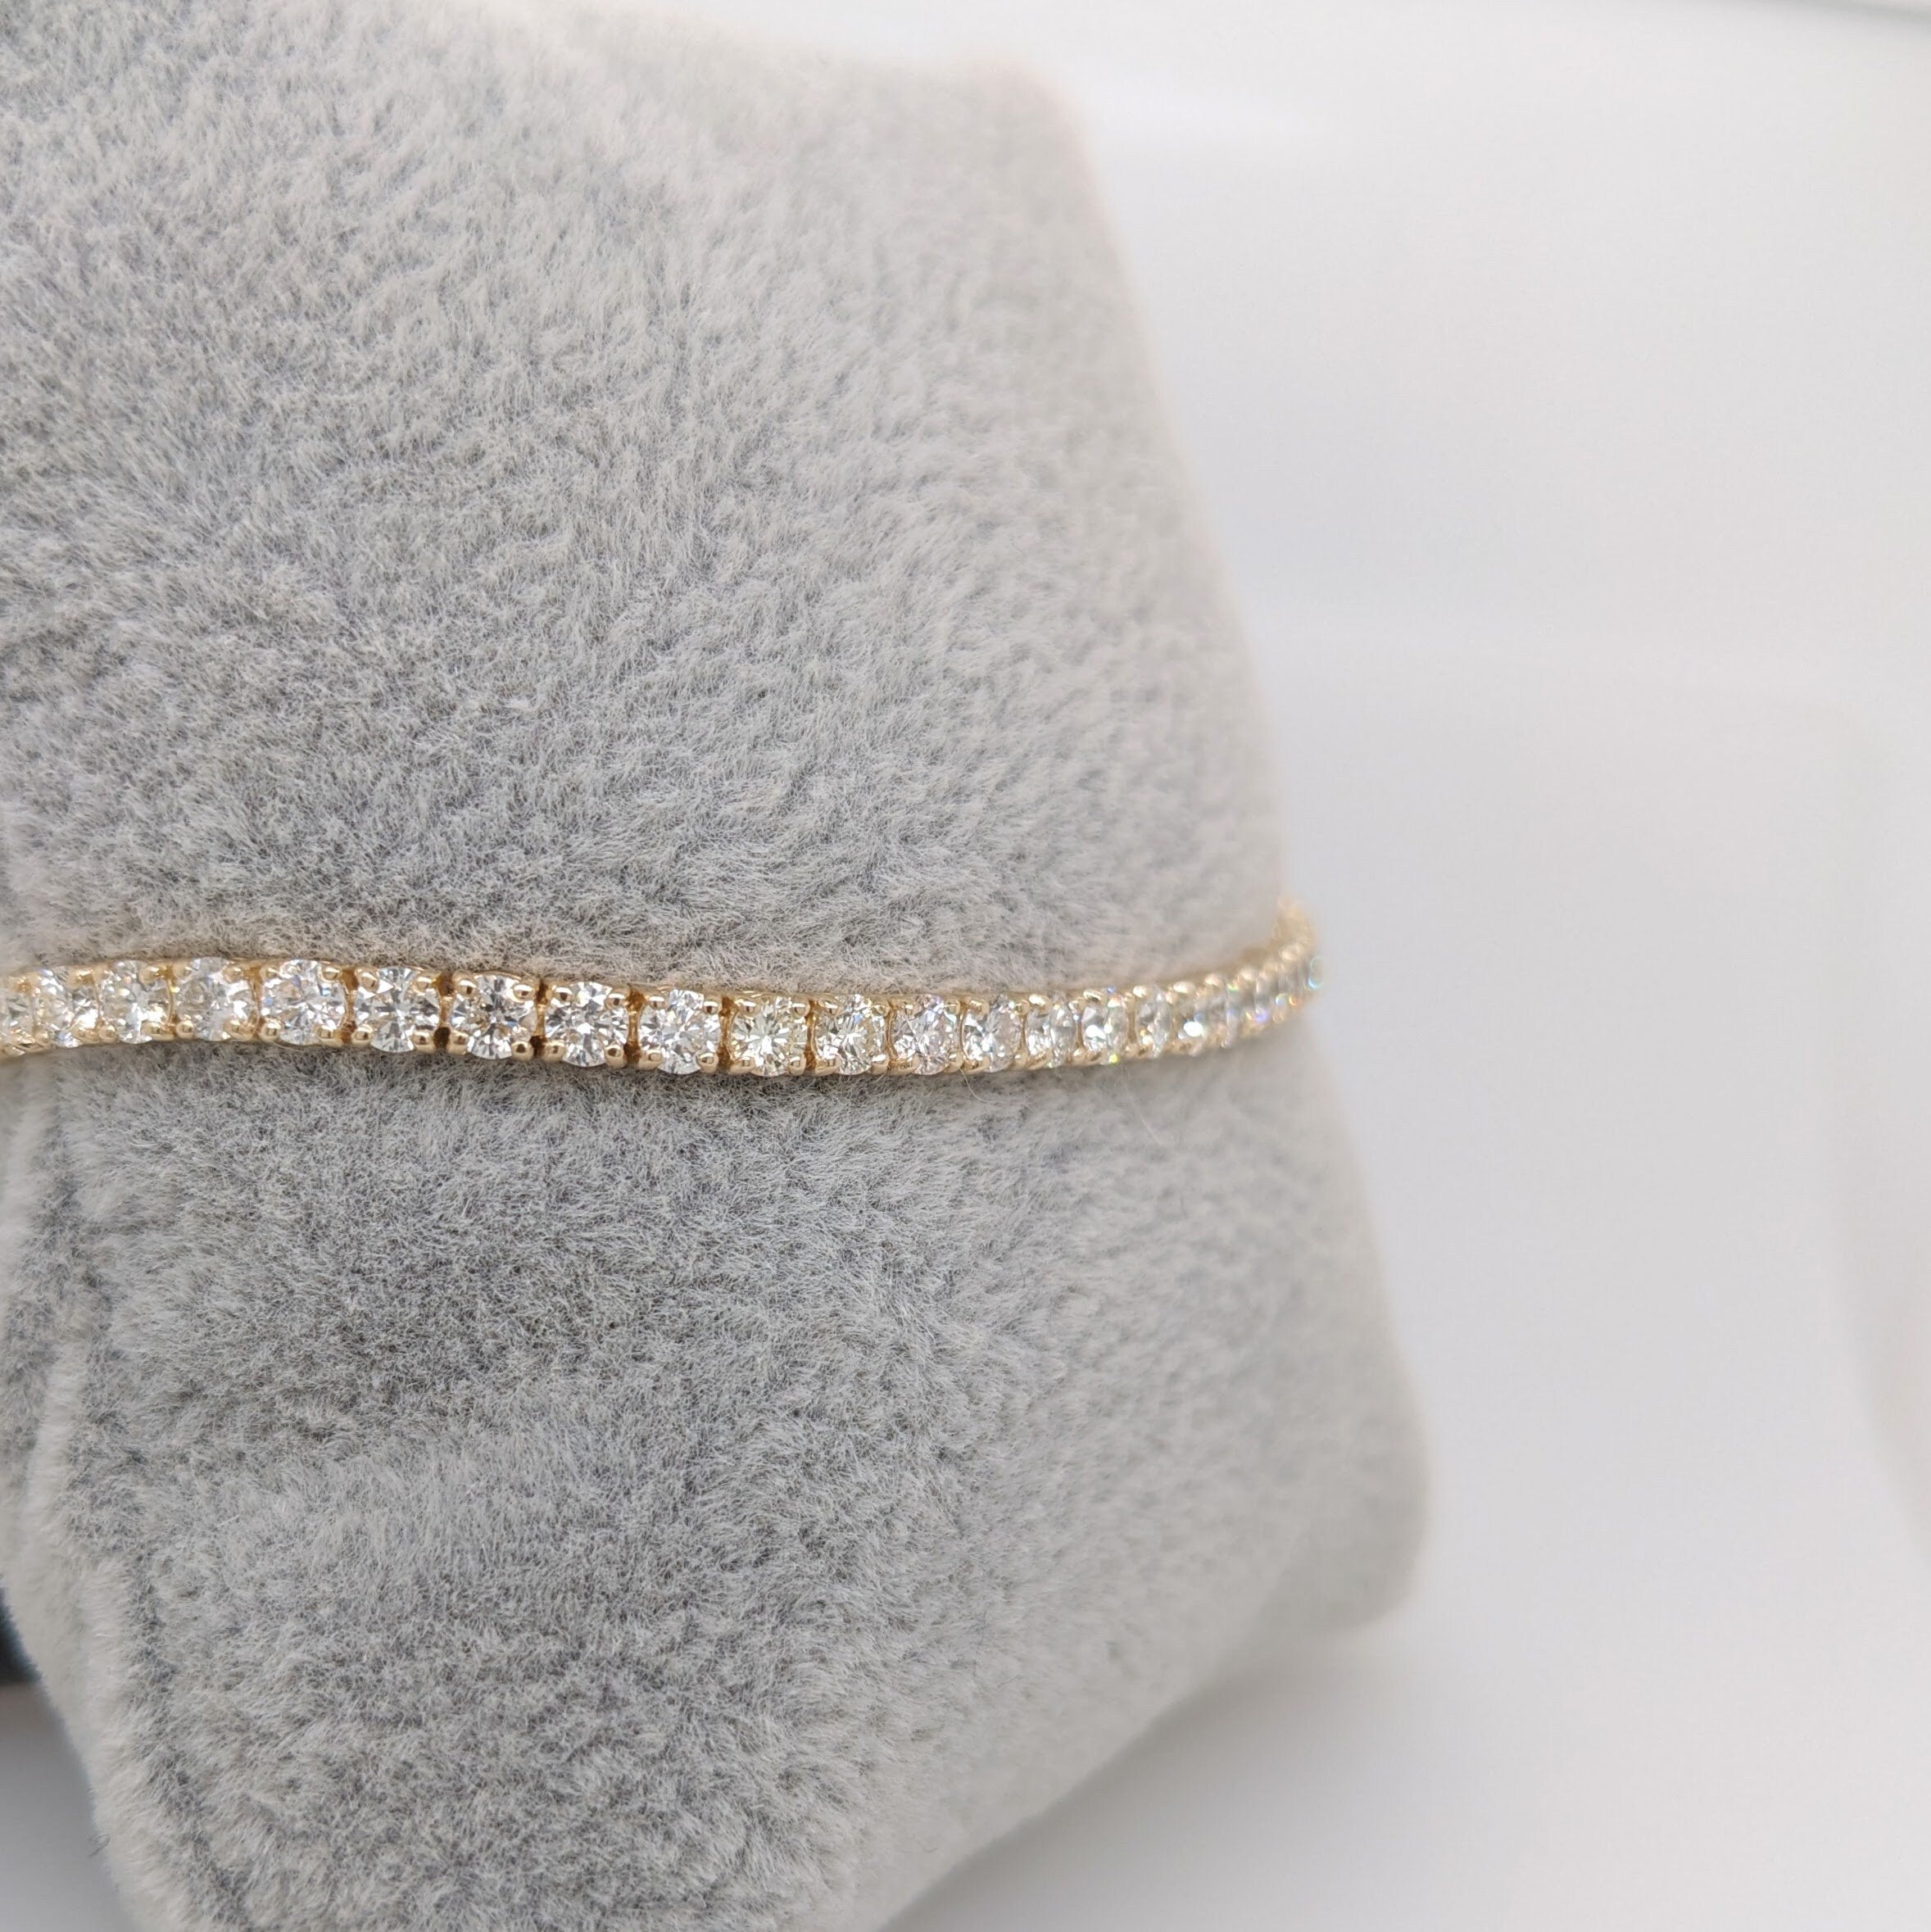 5 carats Diamond Tennis Bracelet in 14K Yellow Gold with Secure Clasp | Low Profile 4 prong | Natural Gemstone Bracelet | Gift for Her